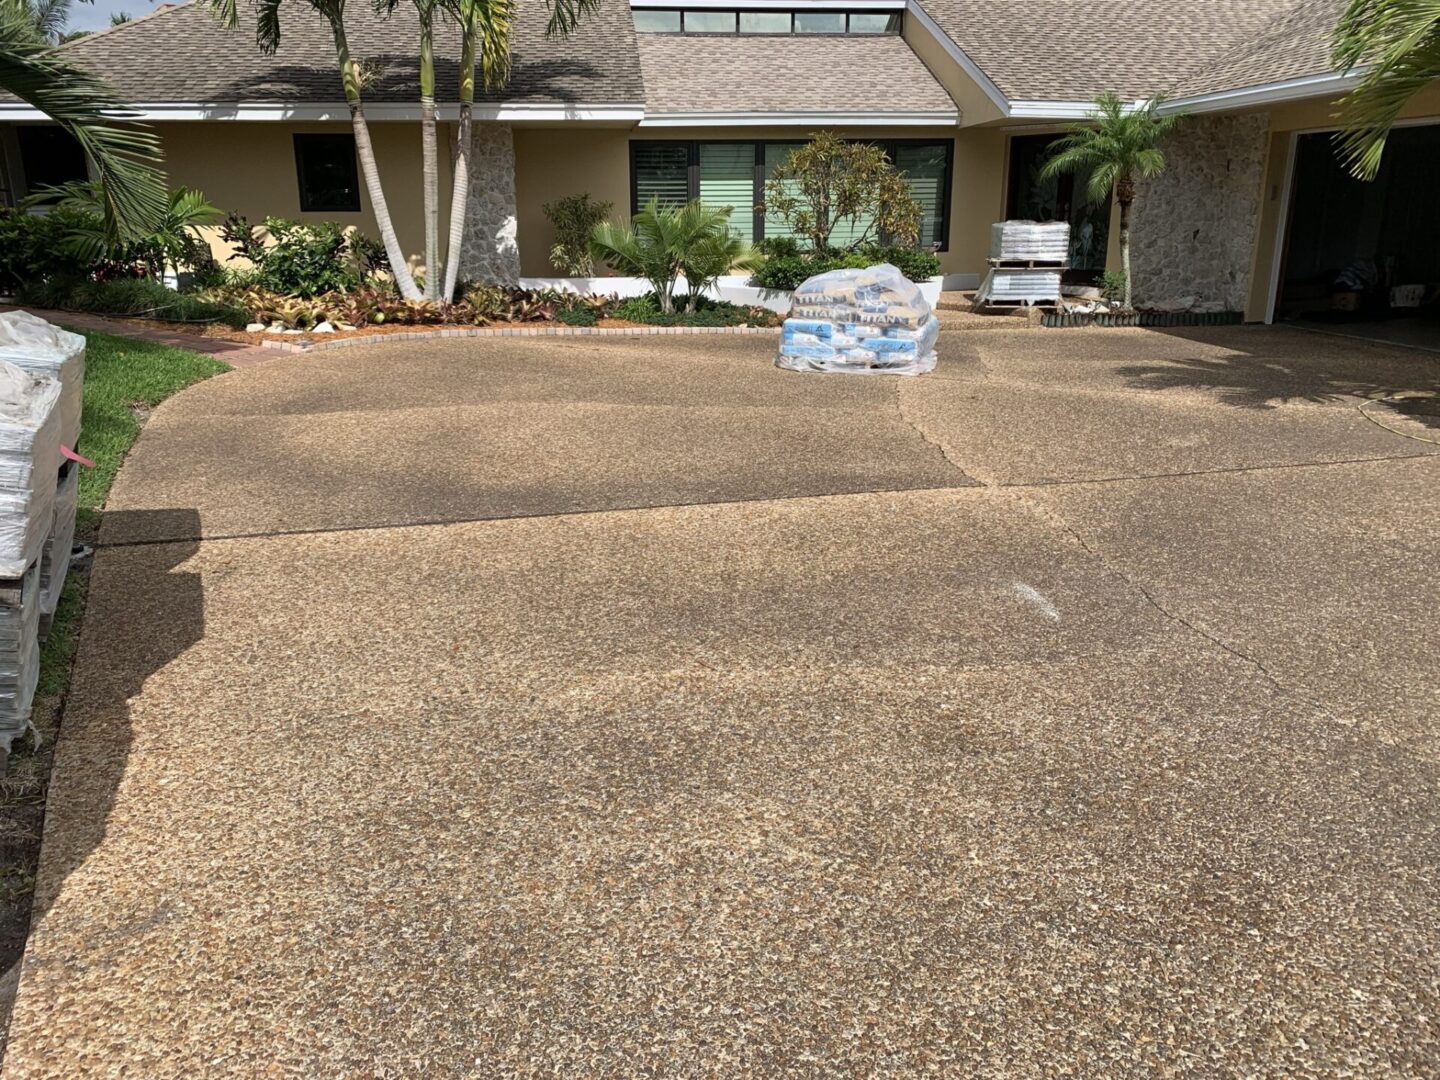 A driveway with a lot of gravel on it